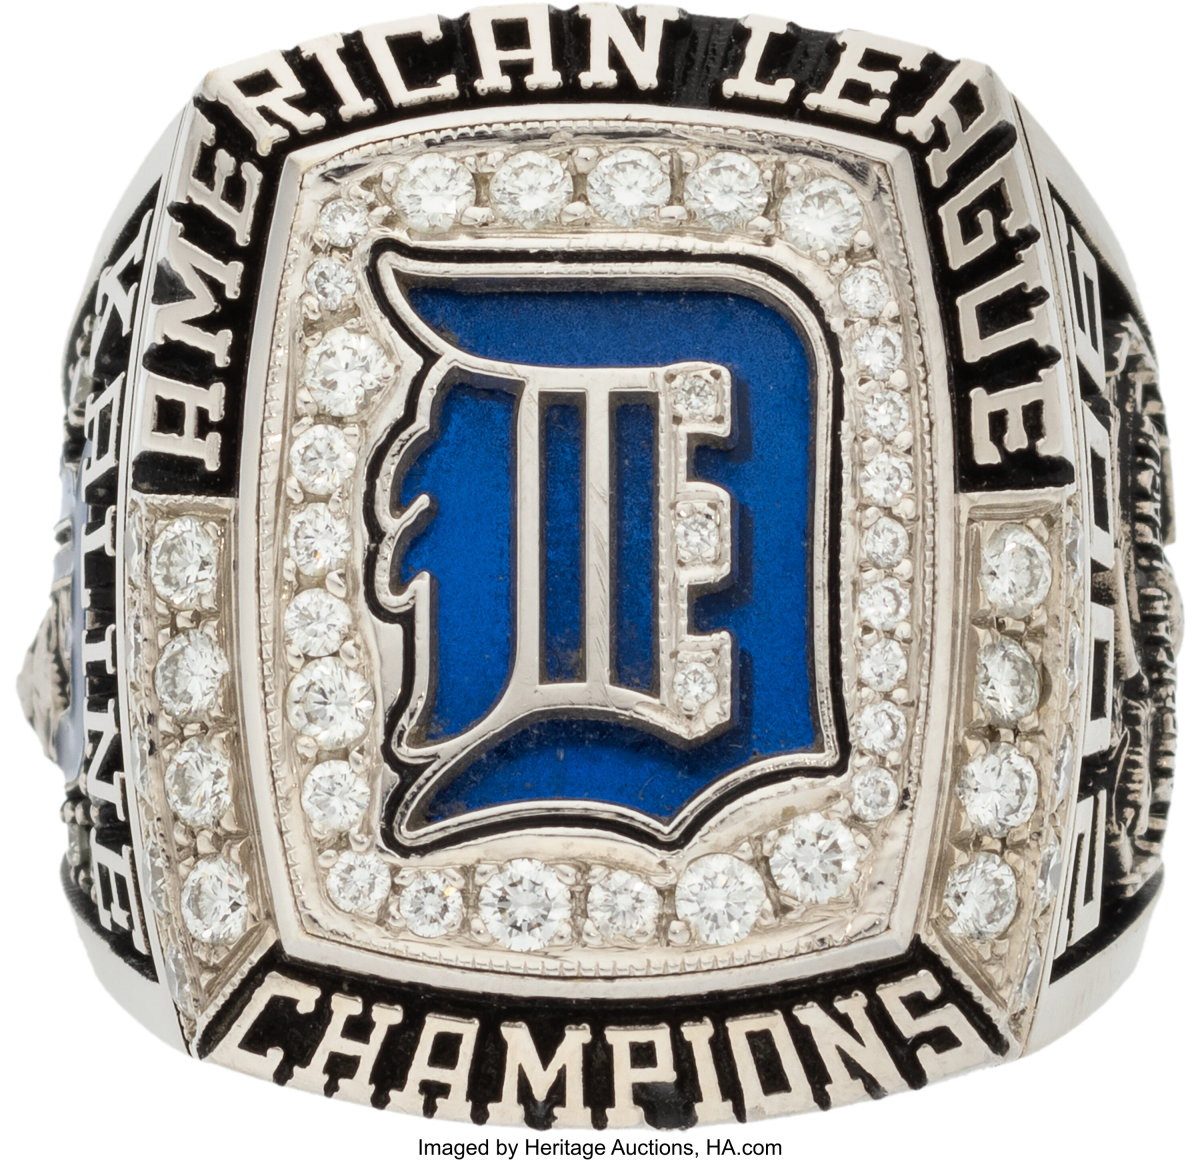 2006 Detroit Tigers AL Championship ring from the Al Kaline Collection.